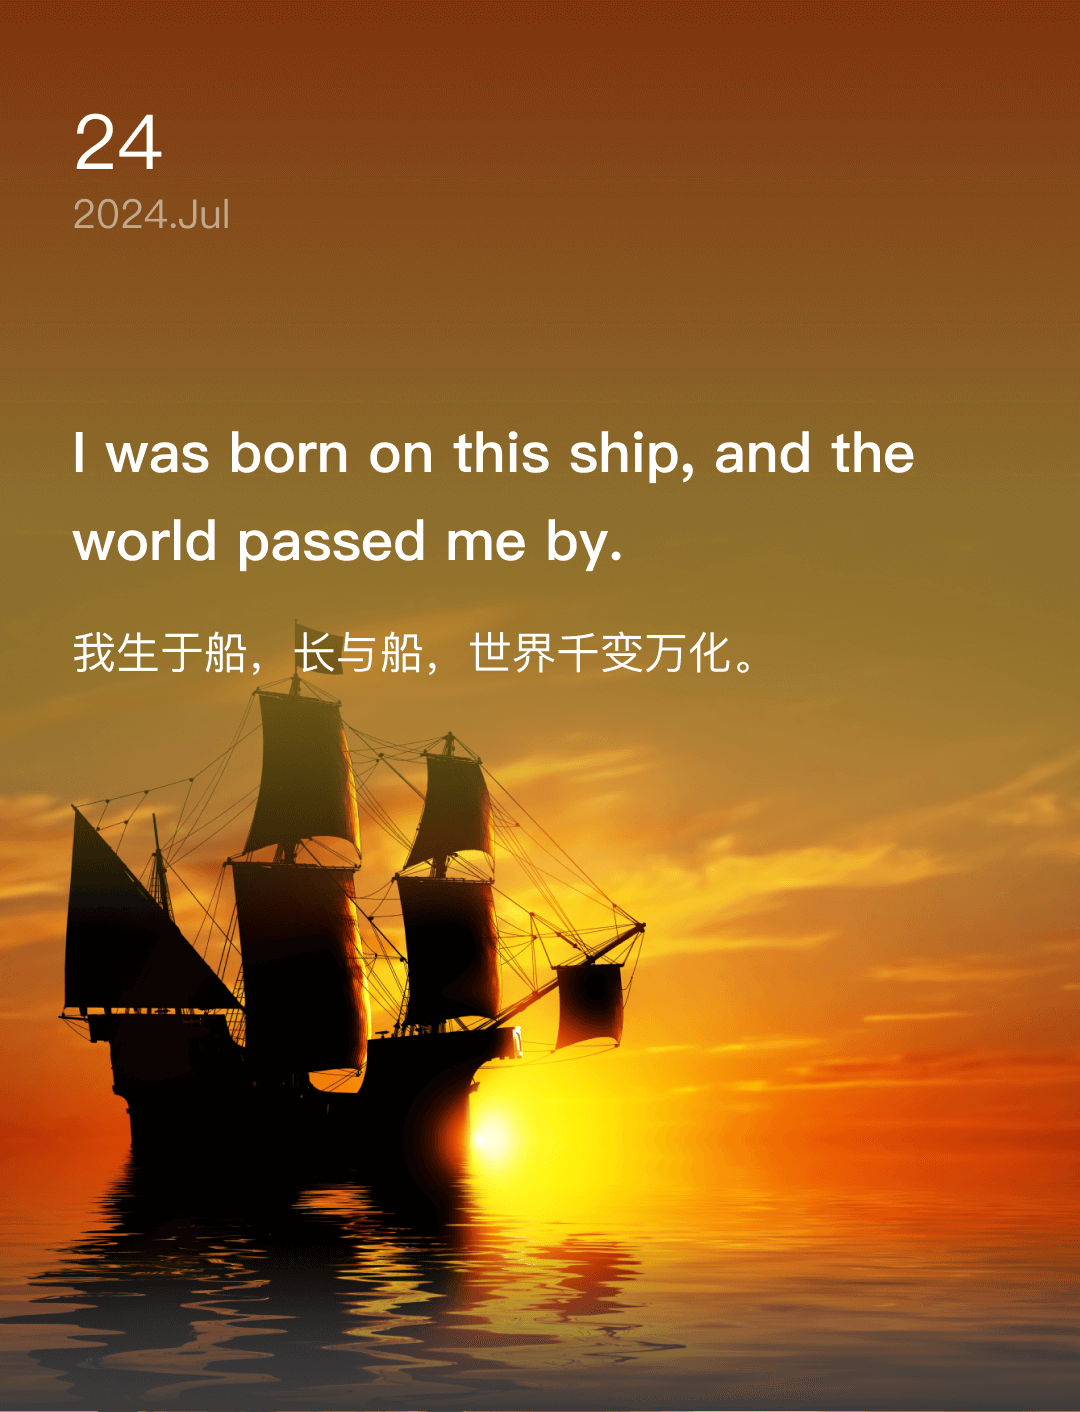 I was born on this ship, and the world passed me by.